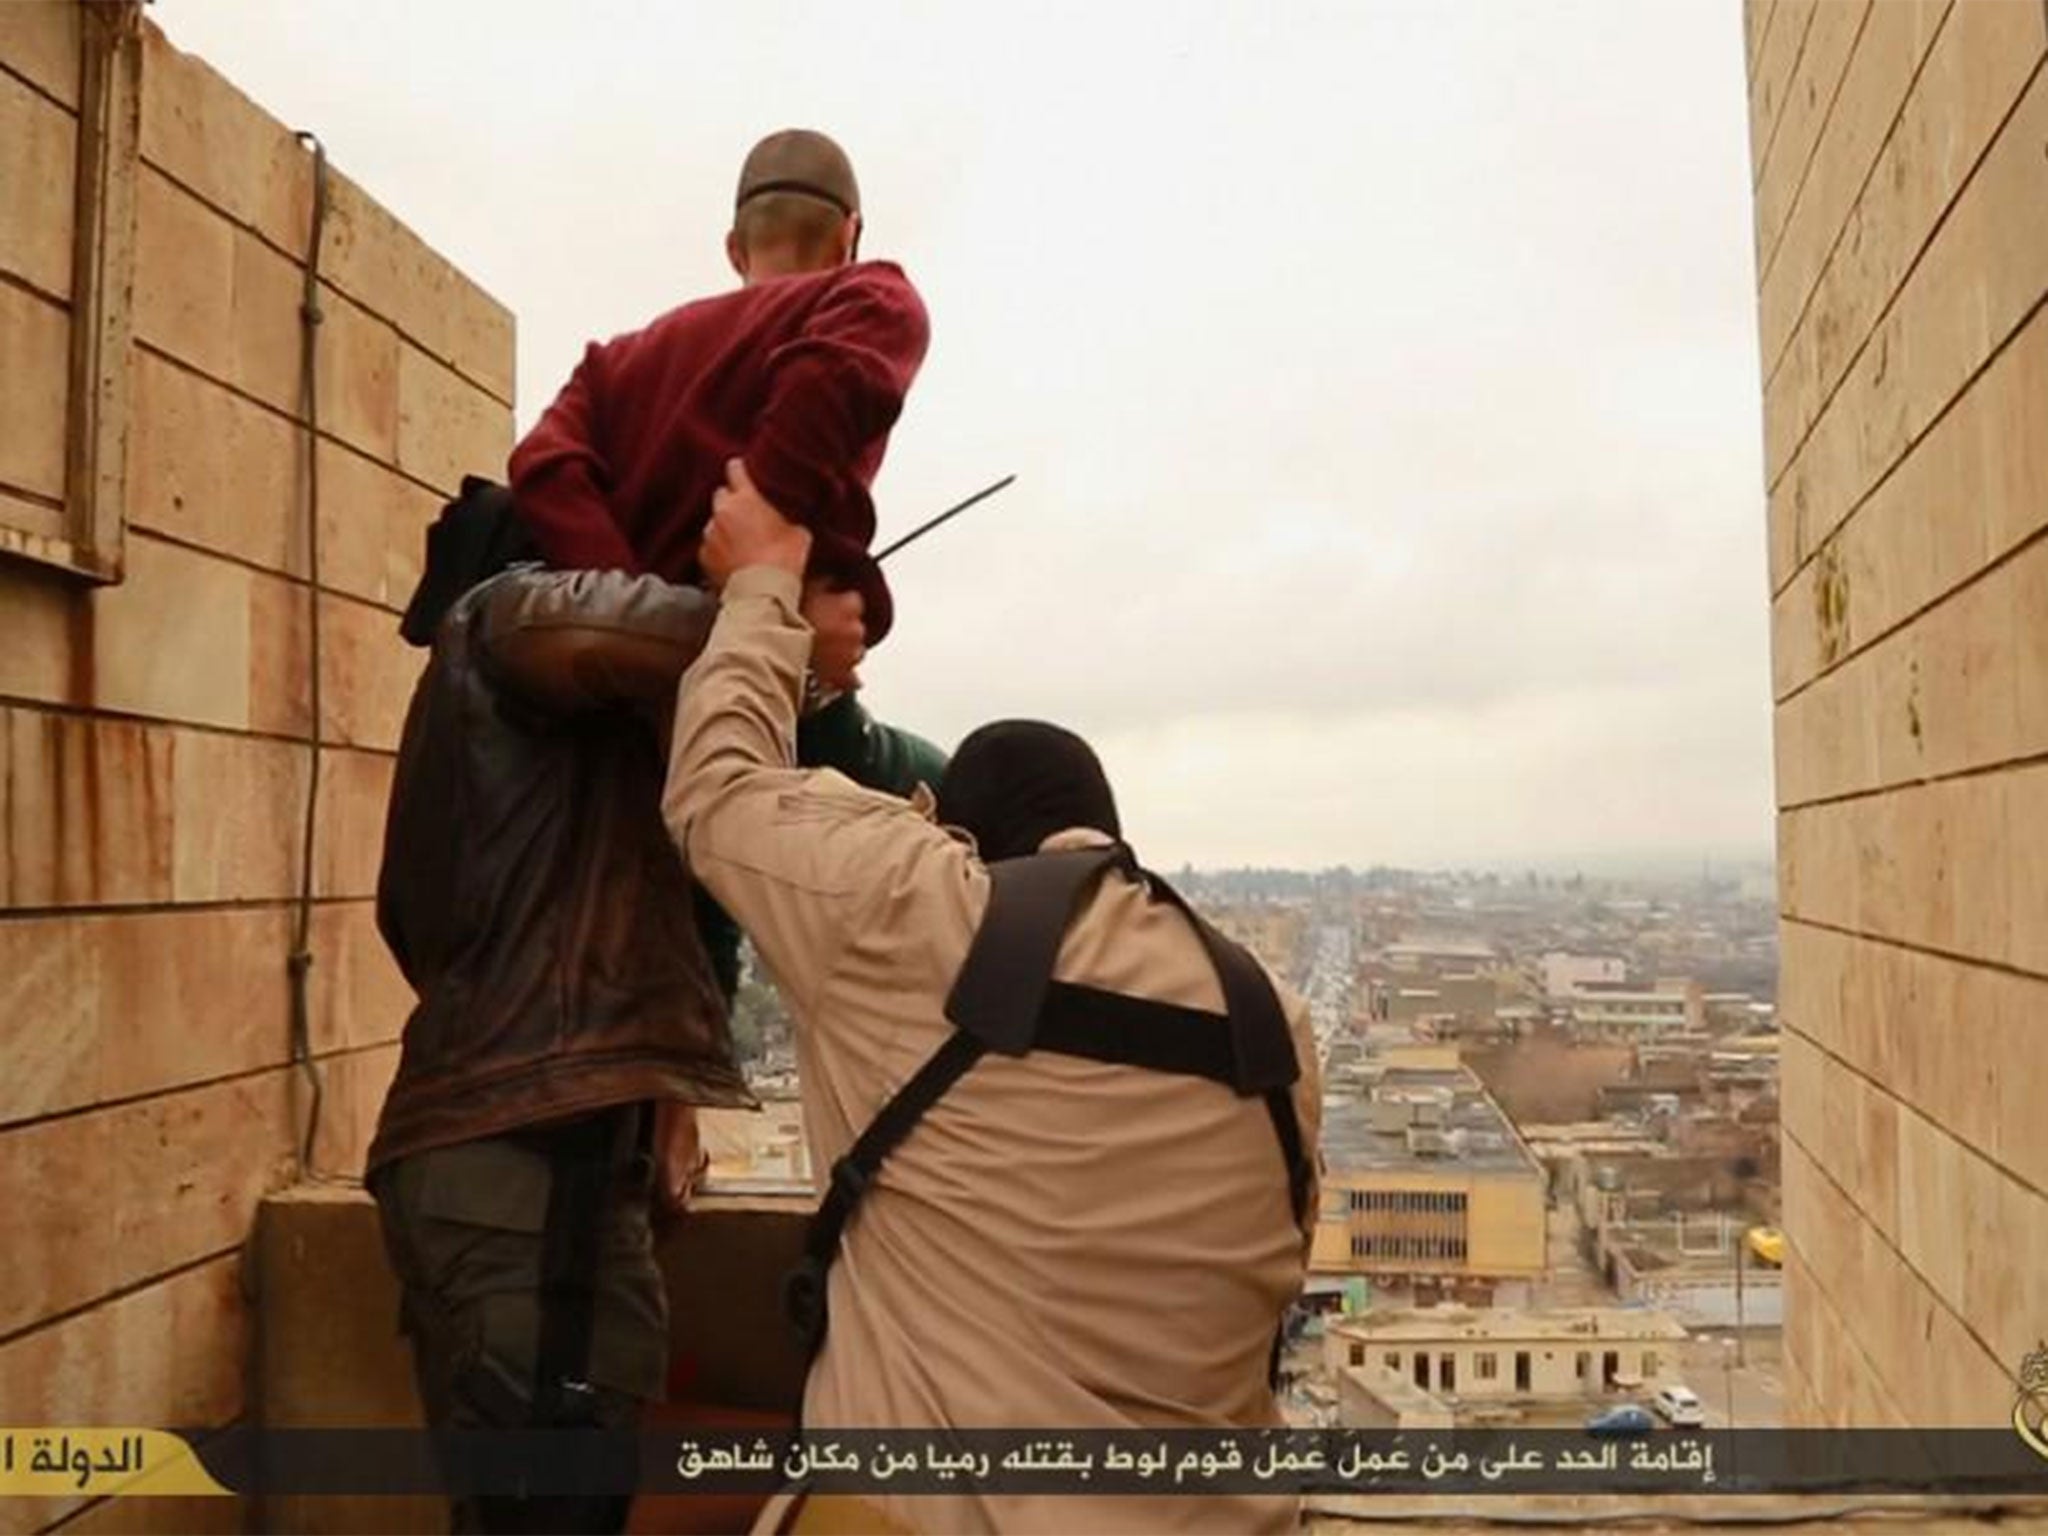 Isis images appear to show the execution of two men accused of being gay